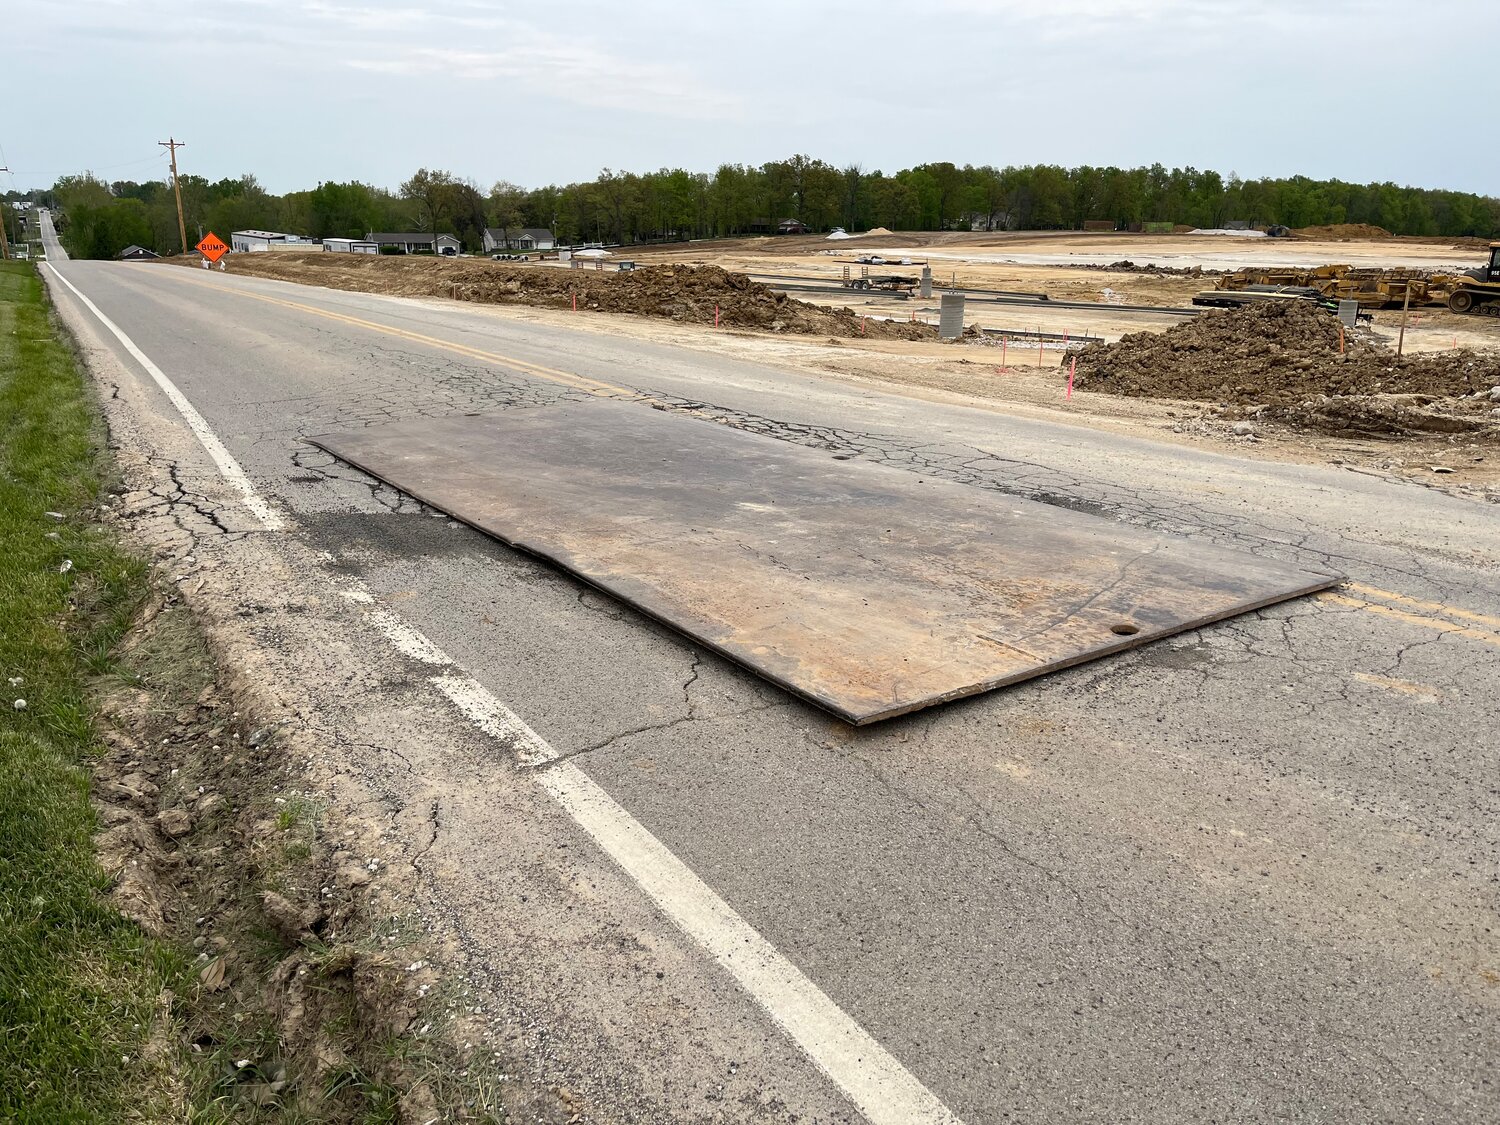 A TEMPORARY FIX - Several steel plates cover the most serious damage caused by trucks entering the construction site of the new Wright City high school on Roelker Road.